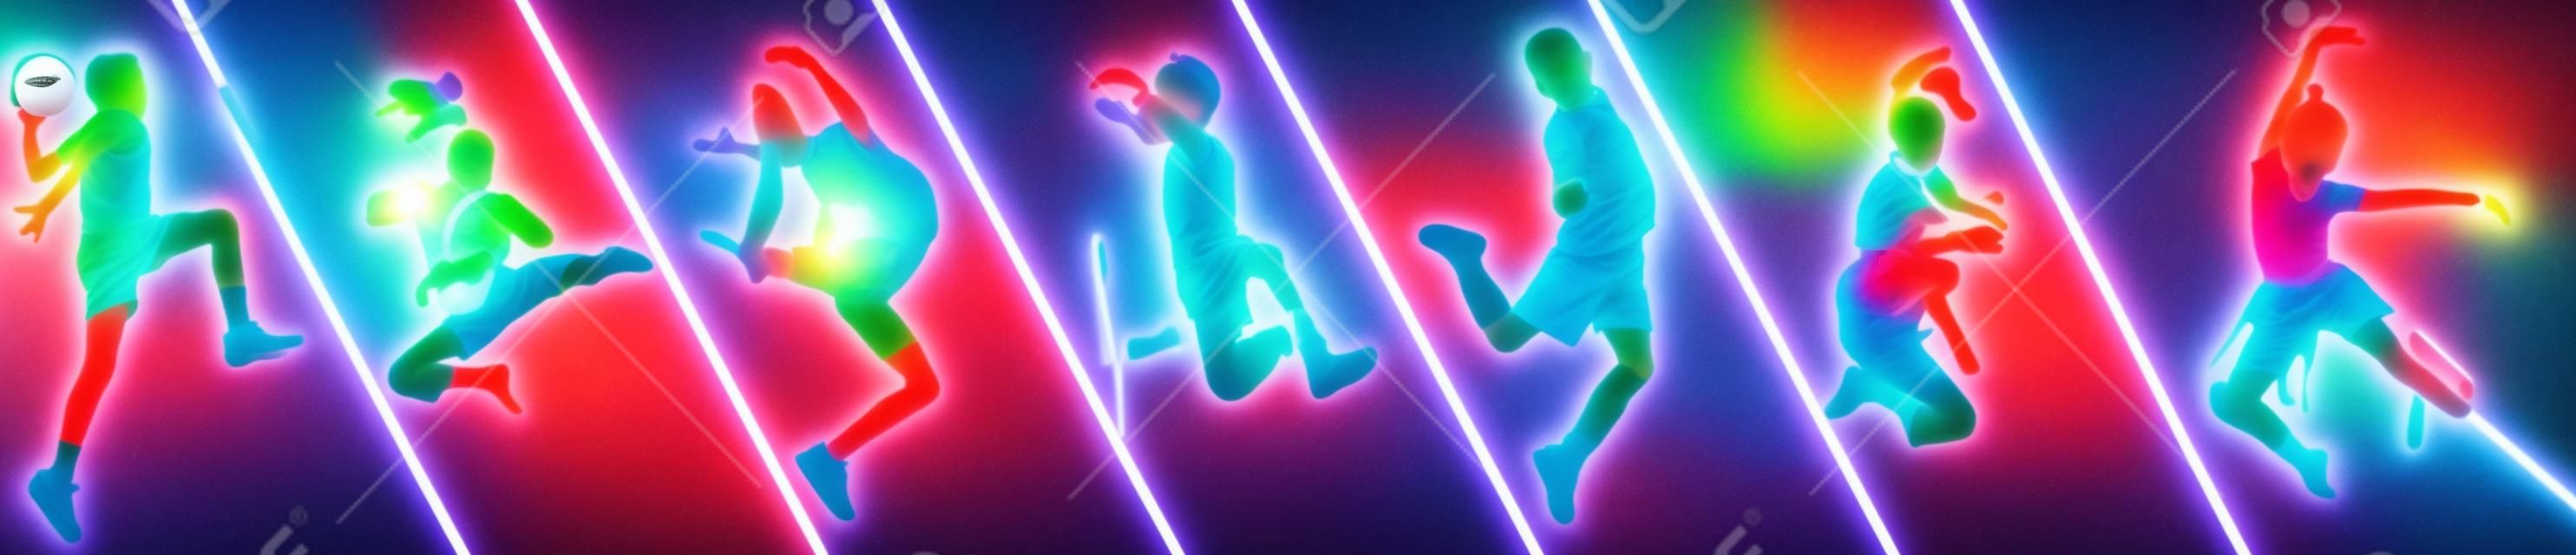 Poster. Different little sportsmen in action and motion isolated on multicolored background in neon. Flyer. Sport for kids